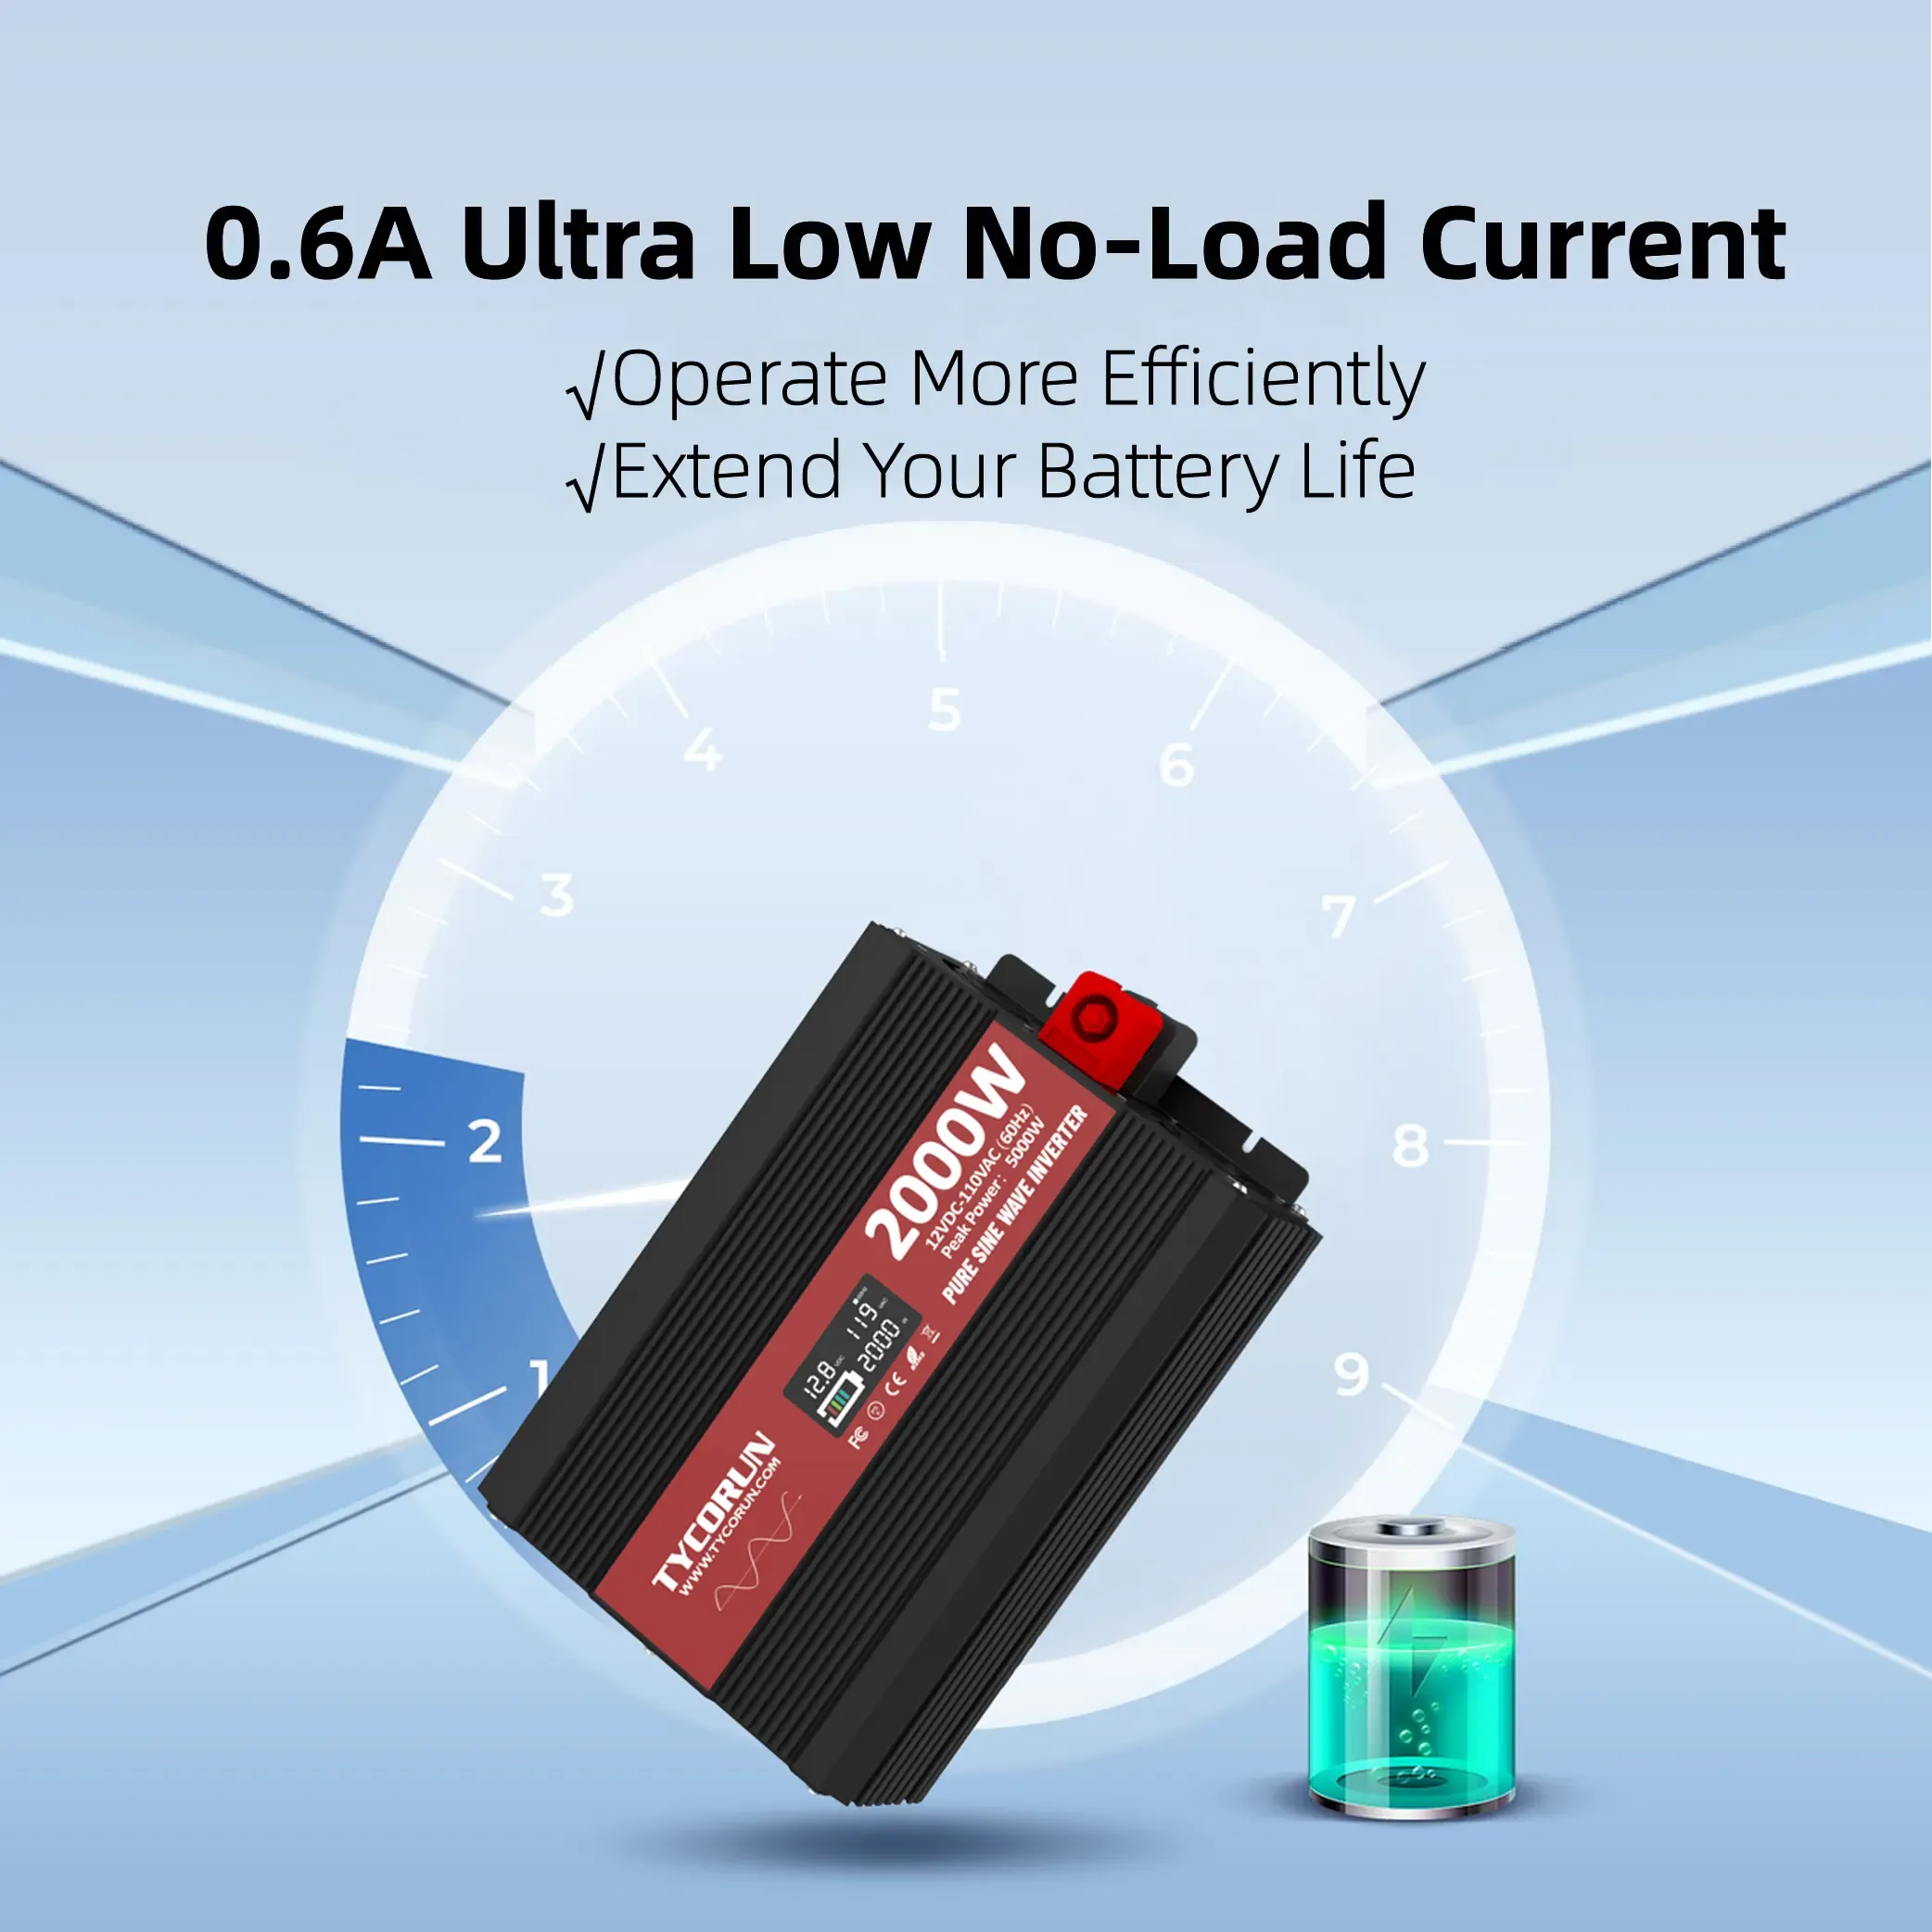 0.6A Ultra low n0-load current